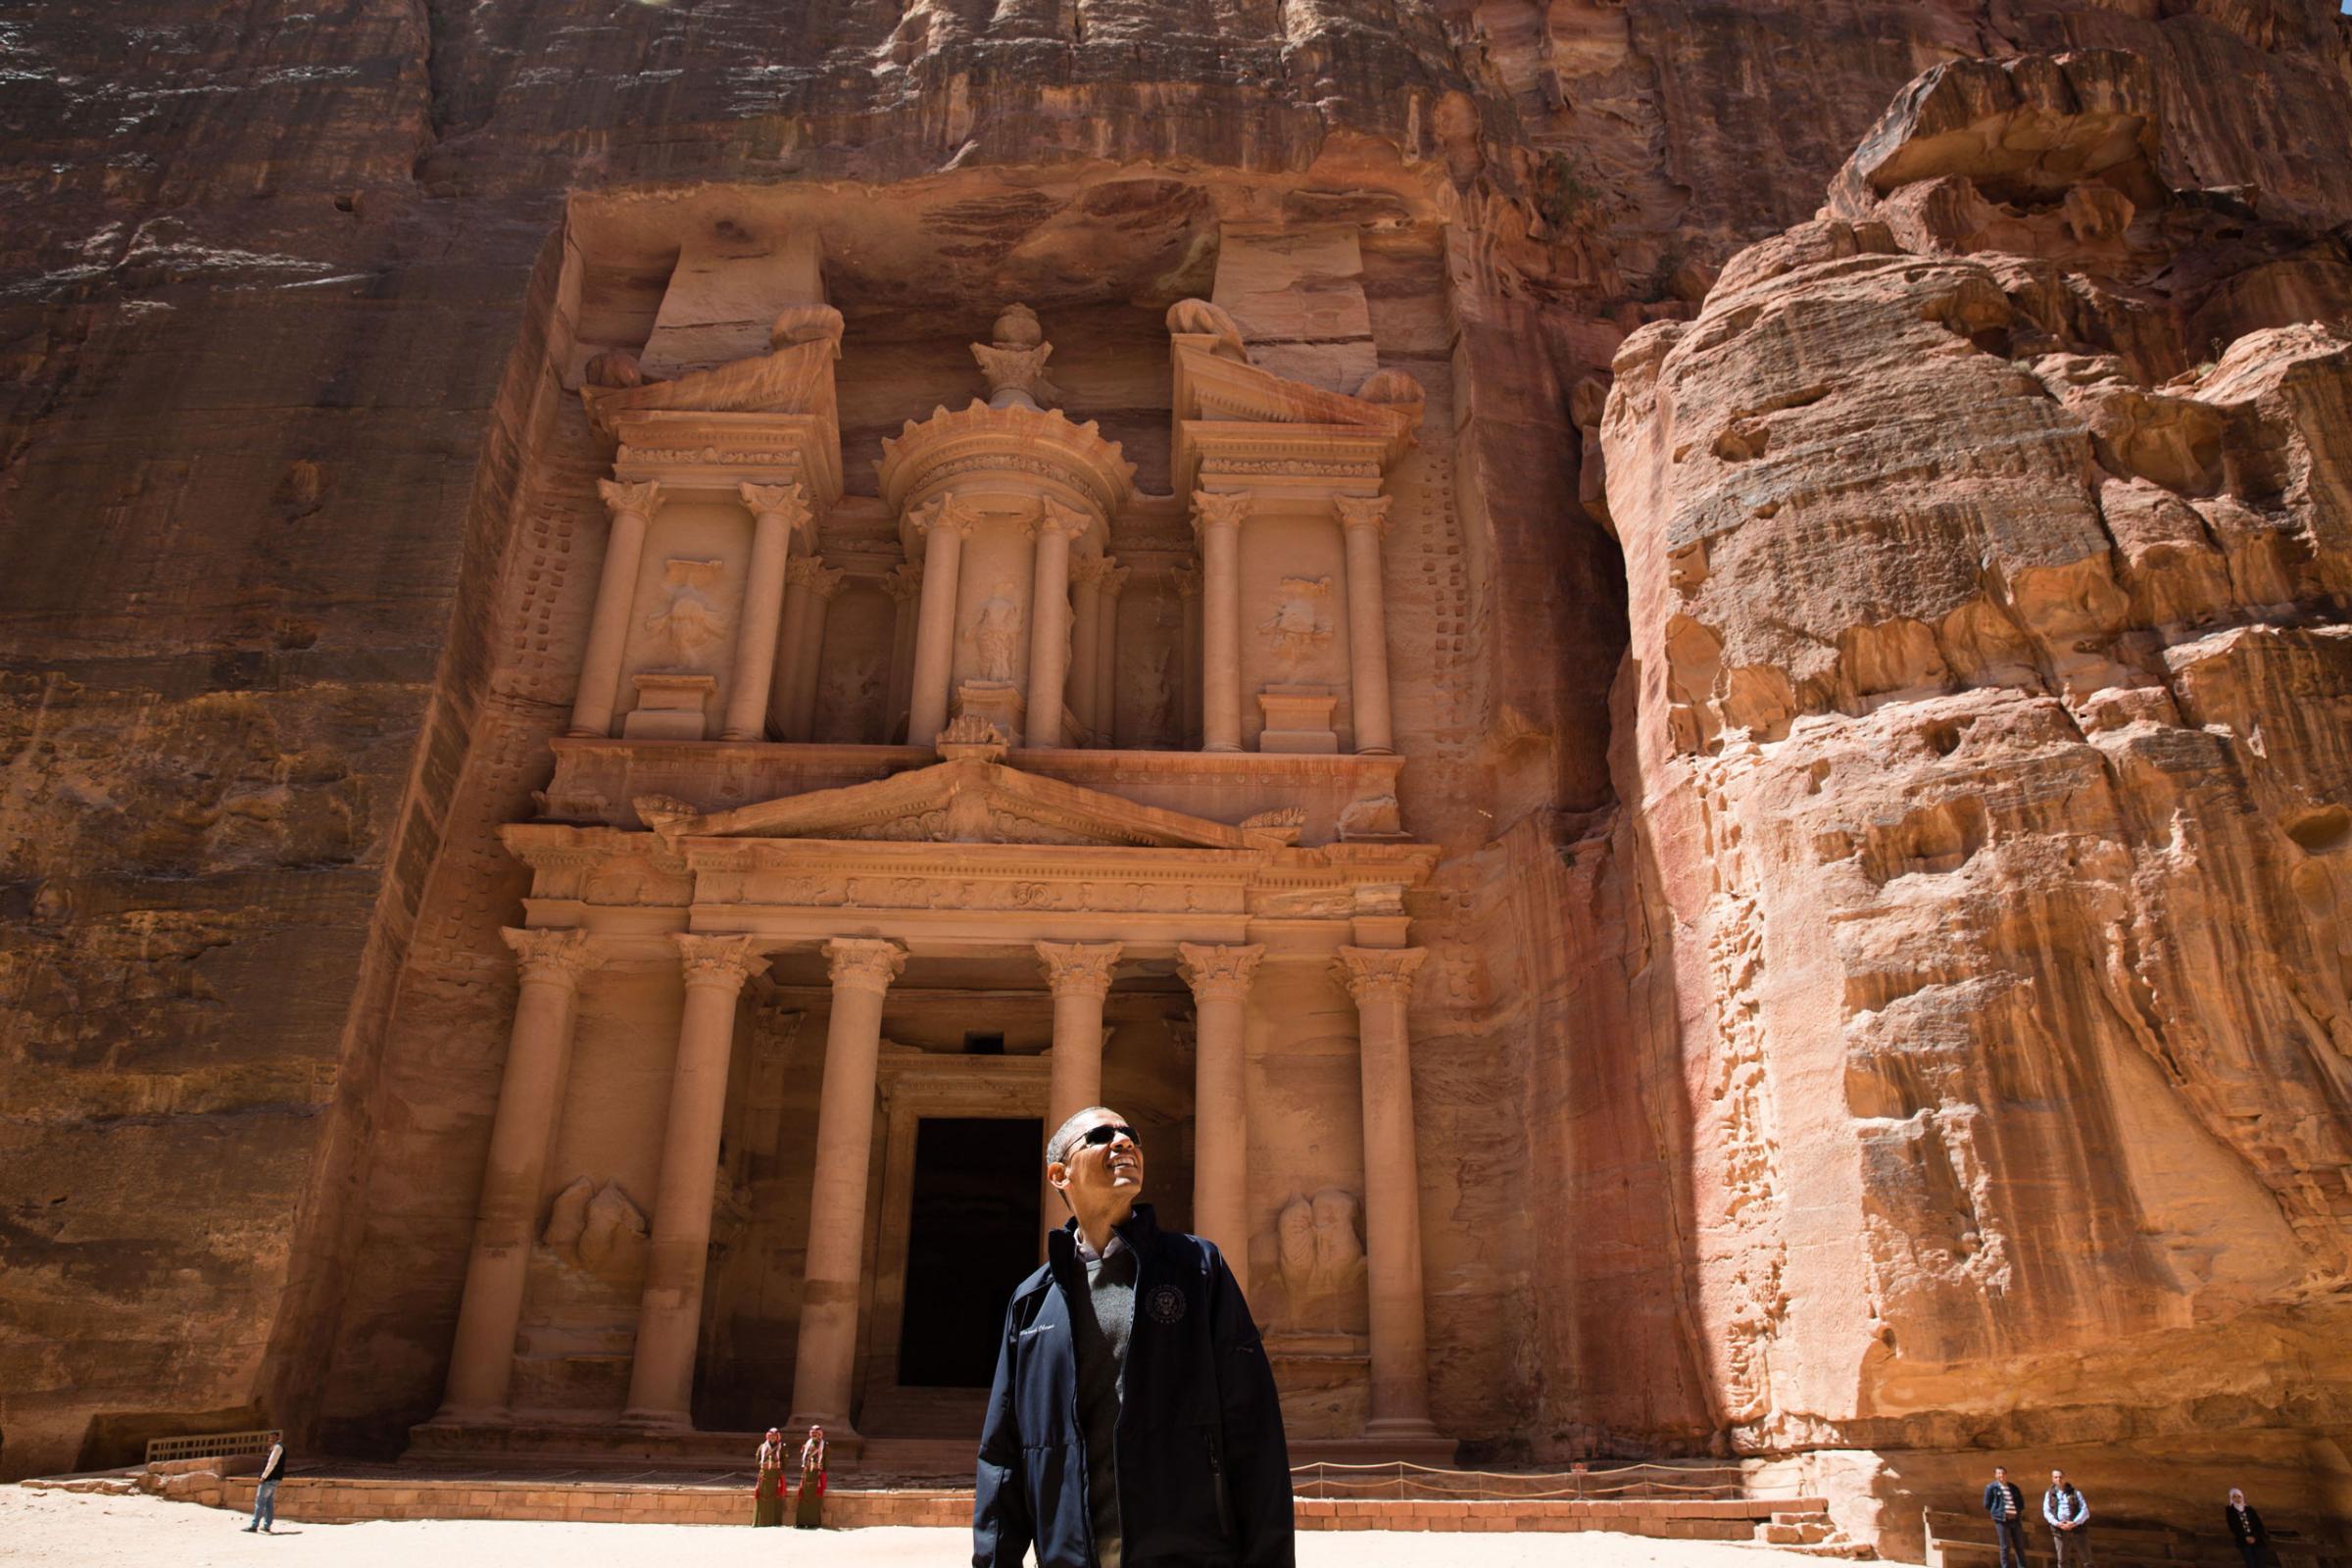 President Barack Obama views the area near the Treasury during a walking tour of the ancient city of Petra in Jordan, March 23, 2013.